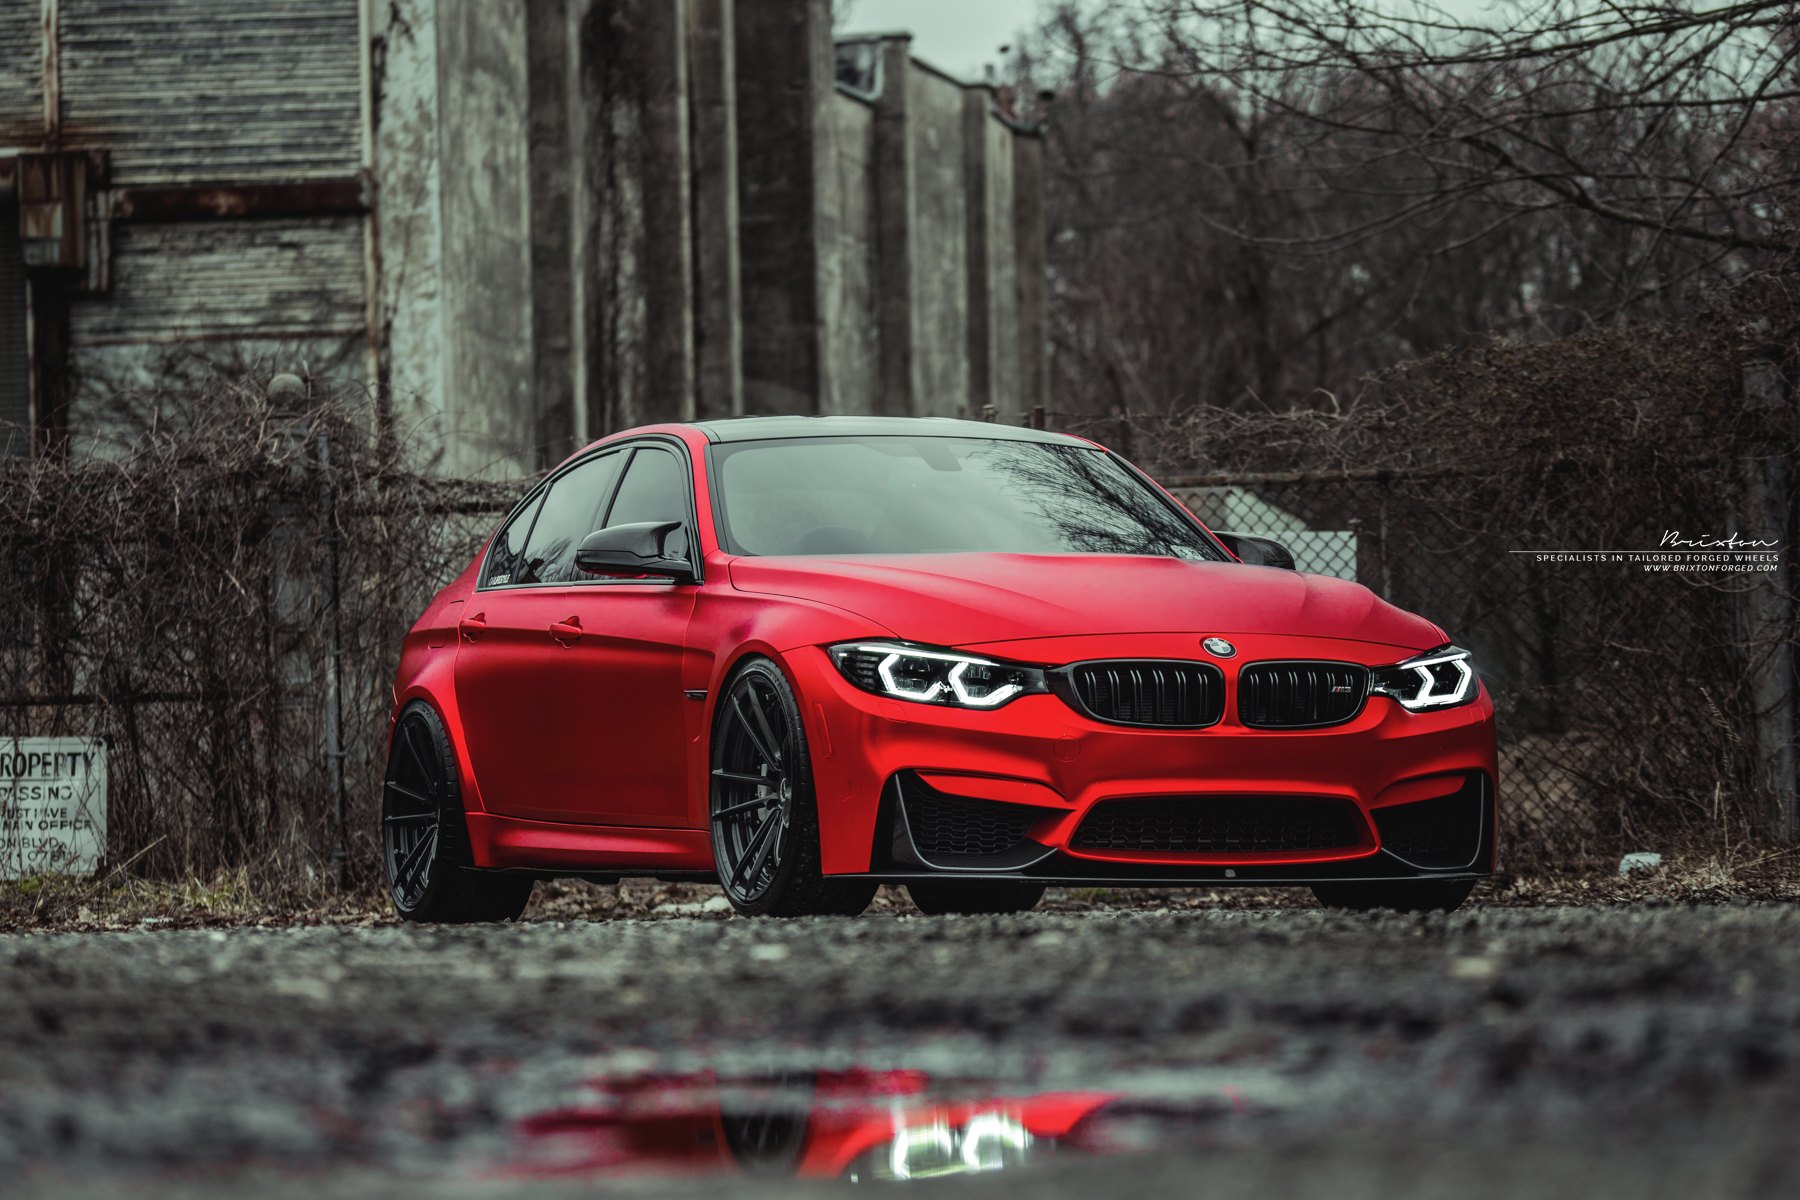 Aftermarket Front Bumper on Red BMW 3-Series - Photo by Brixton Forged Wheels